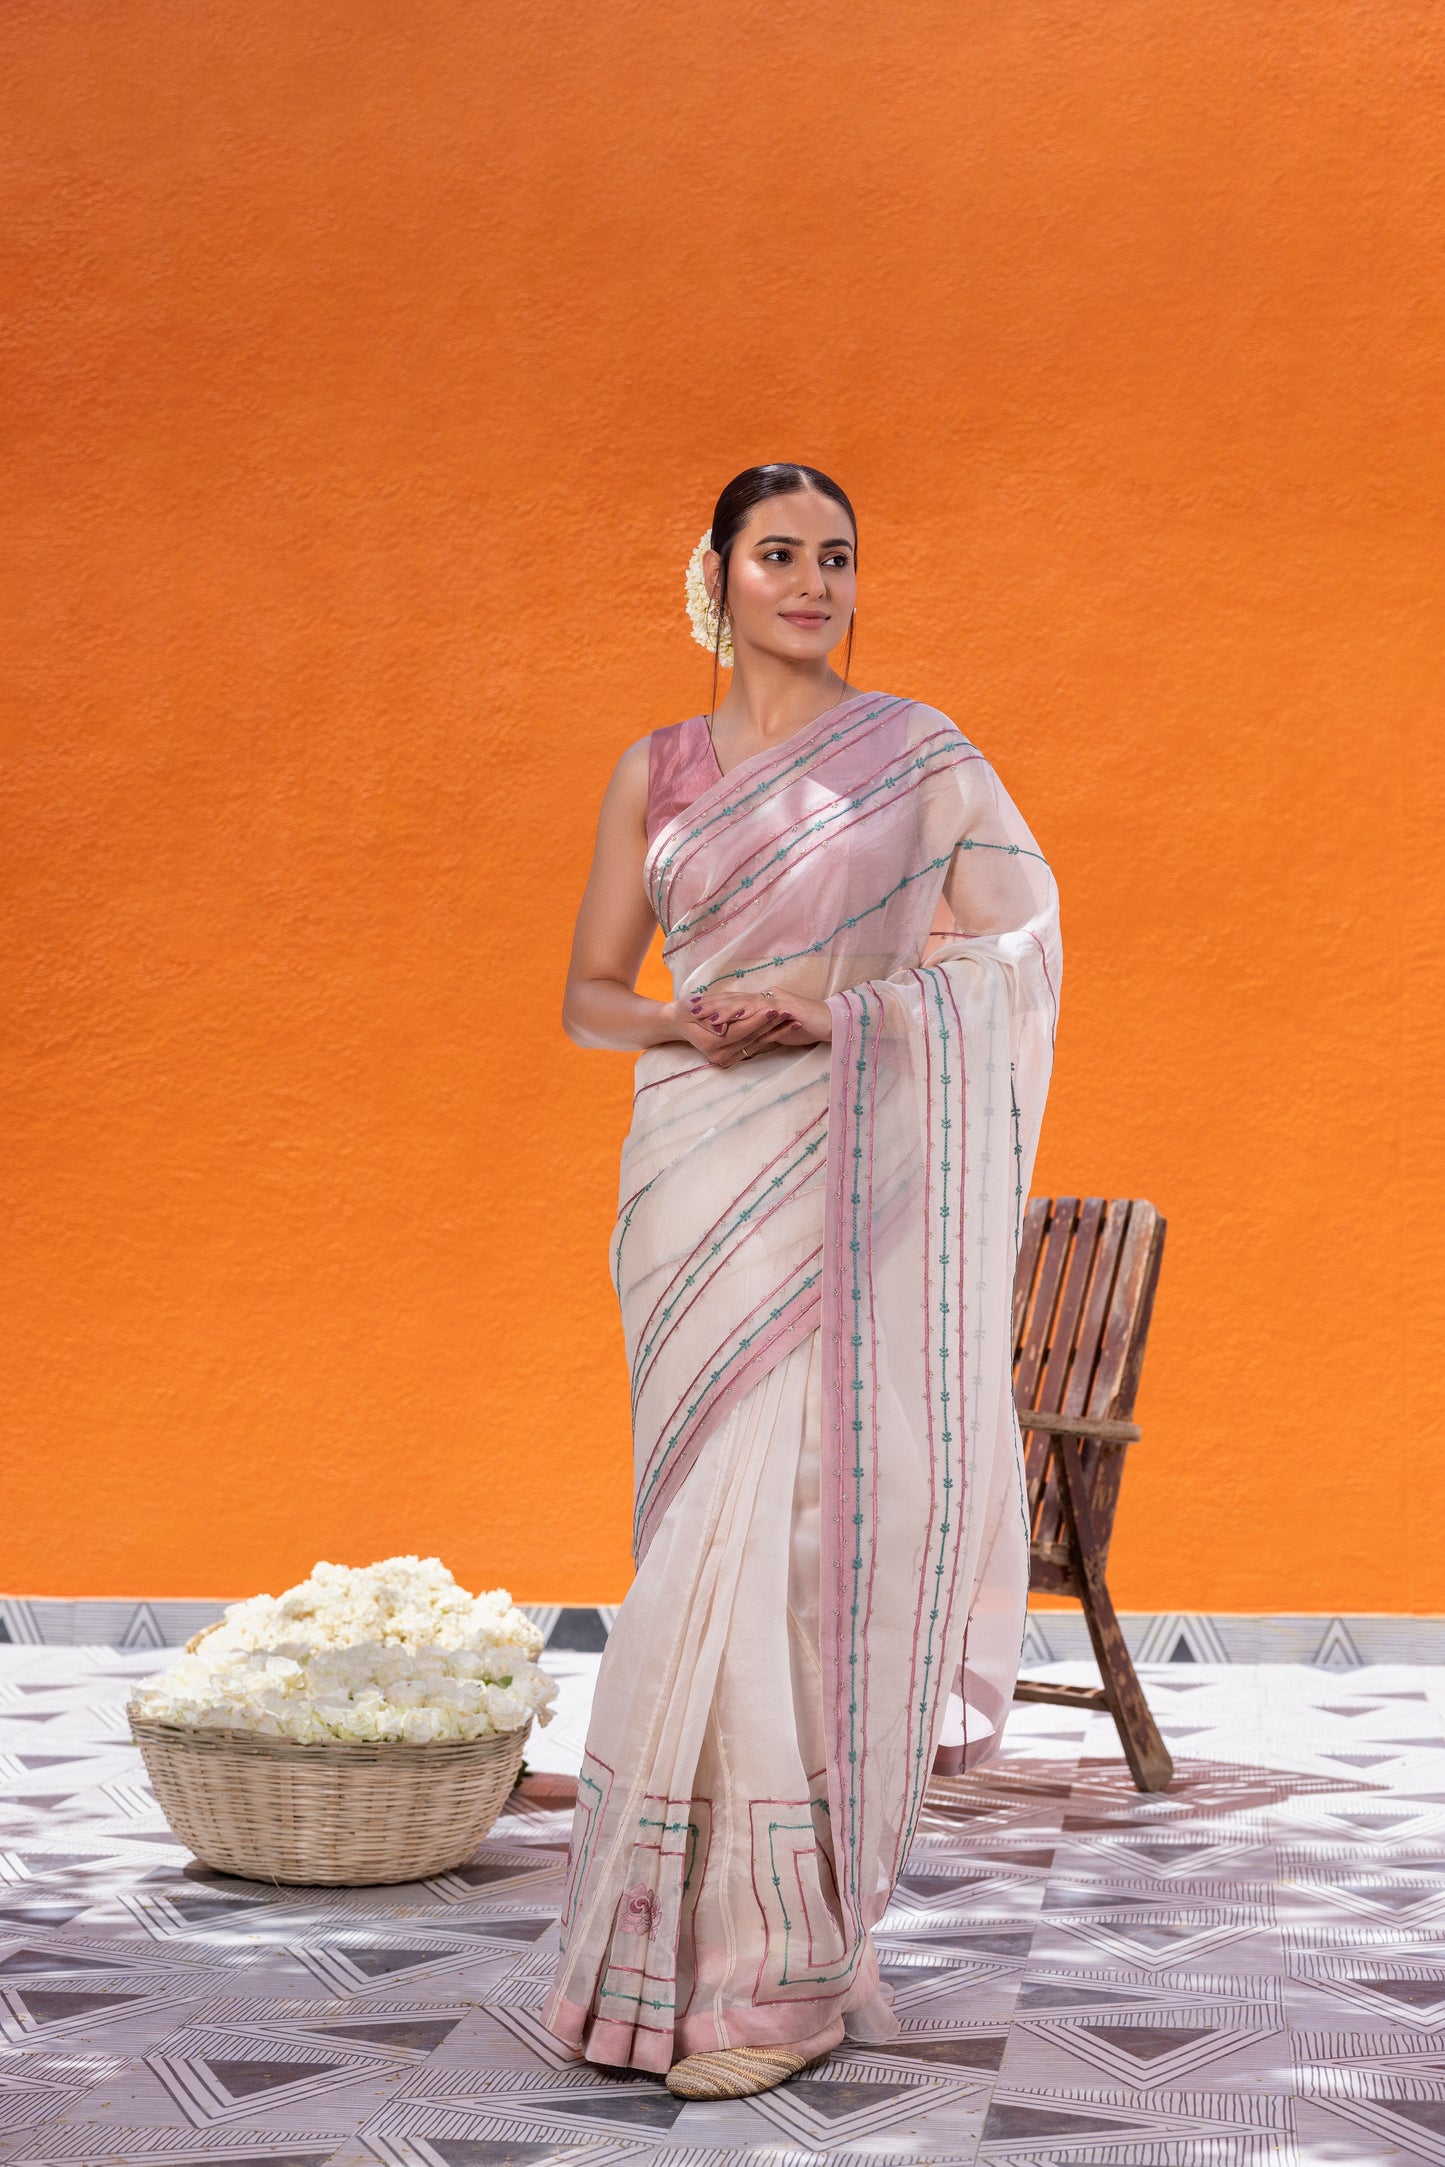 Ivory Organza Saree Comes With Pink Silk Blouse & Organic Cotton Stitched Petticoat